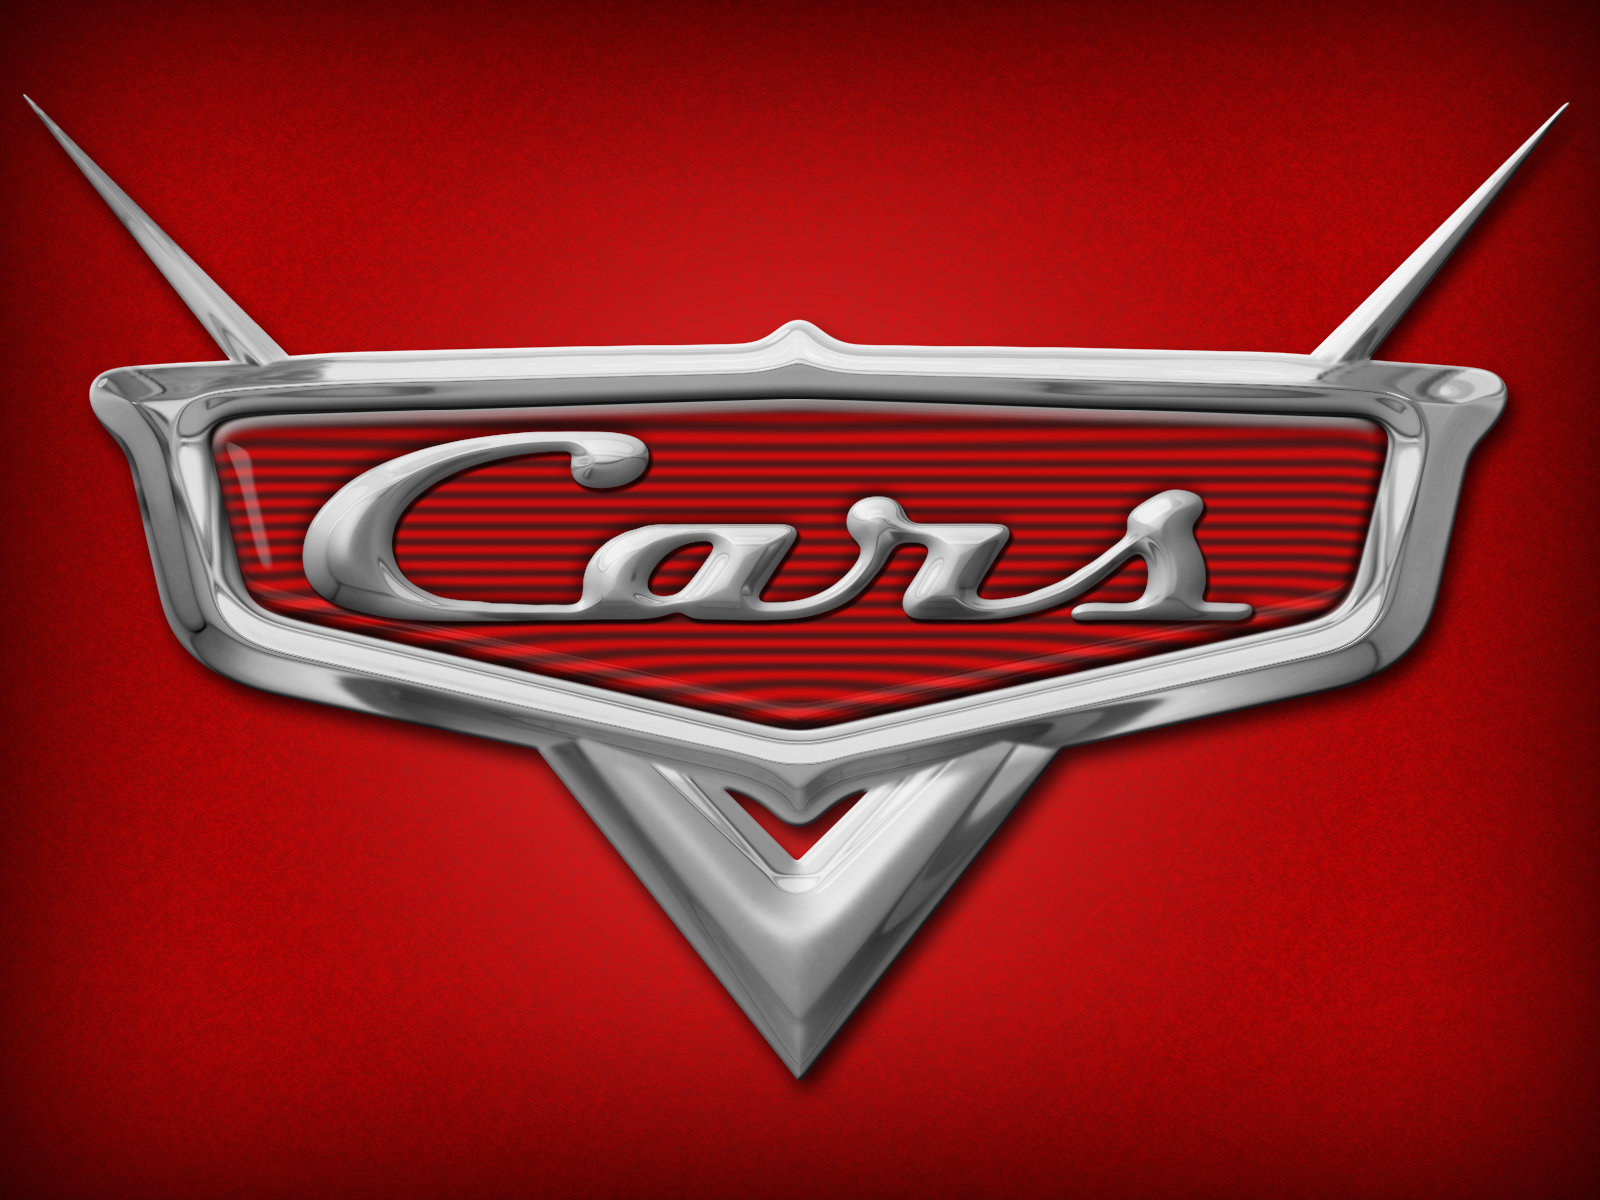 Cars Logo PSD by vicing on Deviant. 